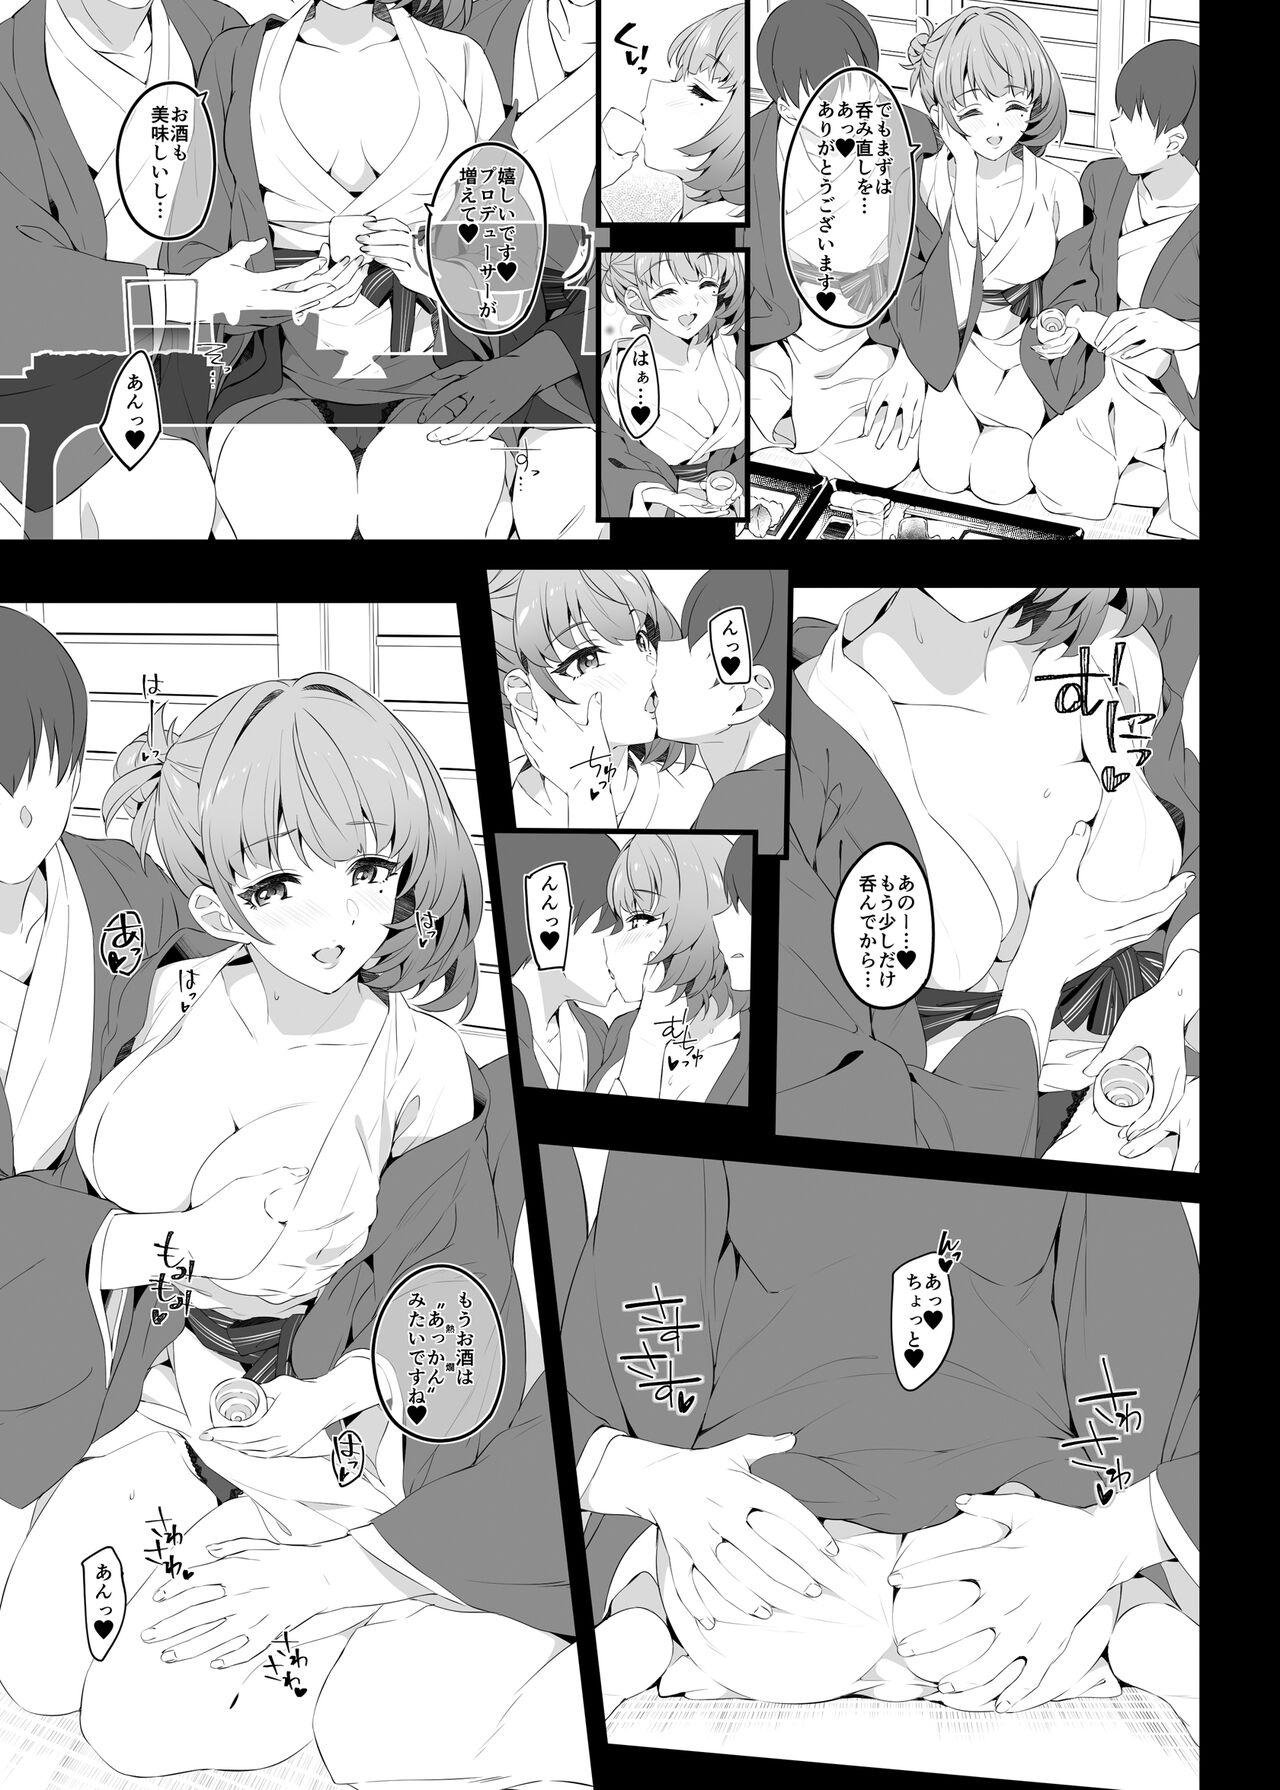 Hymen Flowers blooming at night and the kings in the dream. - The idolmaster Skinny - Page 11